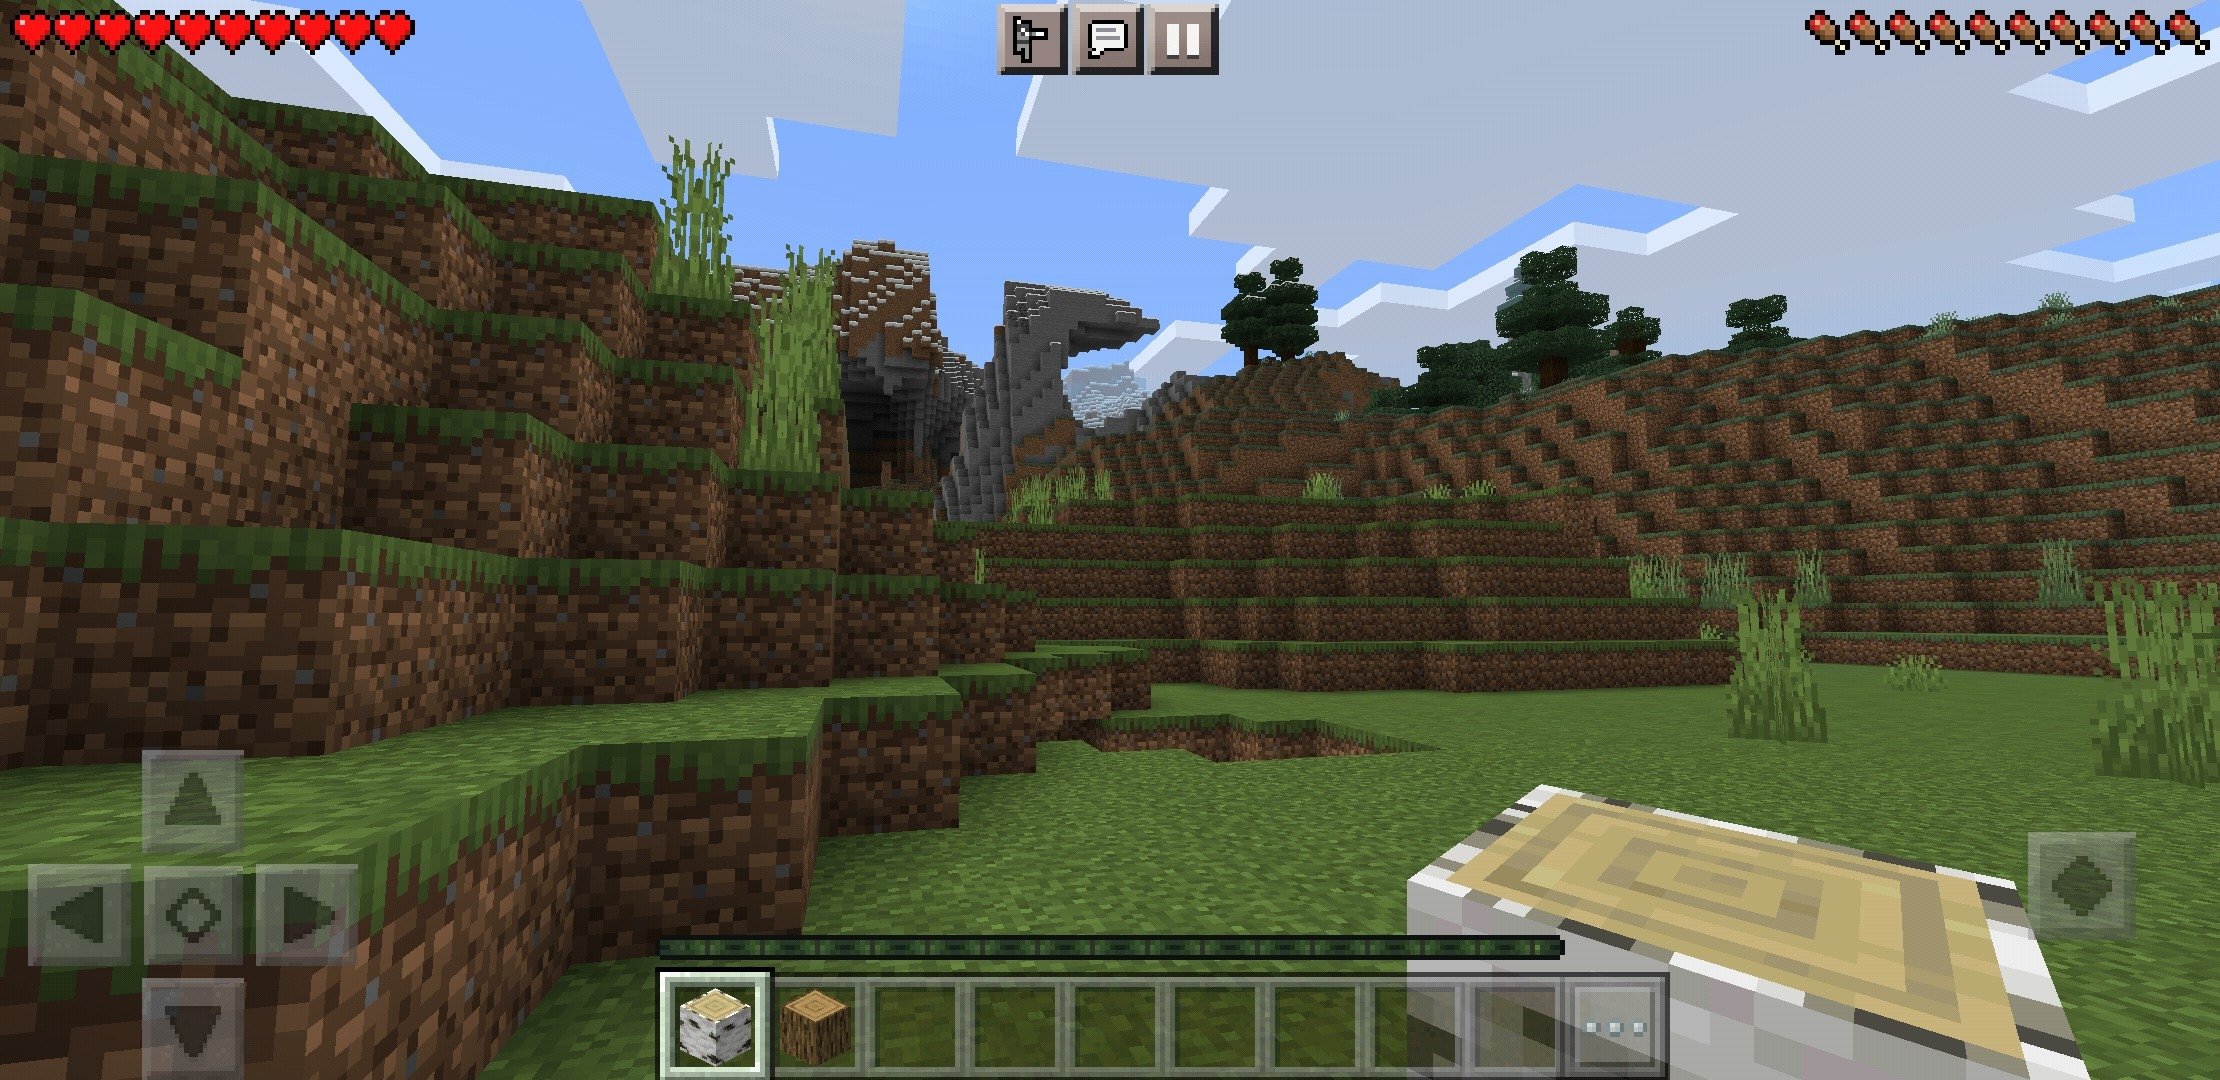 Minecraft APK Download for Android Free